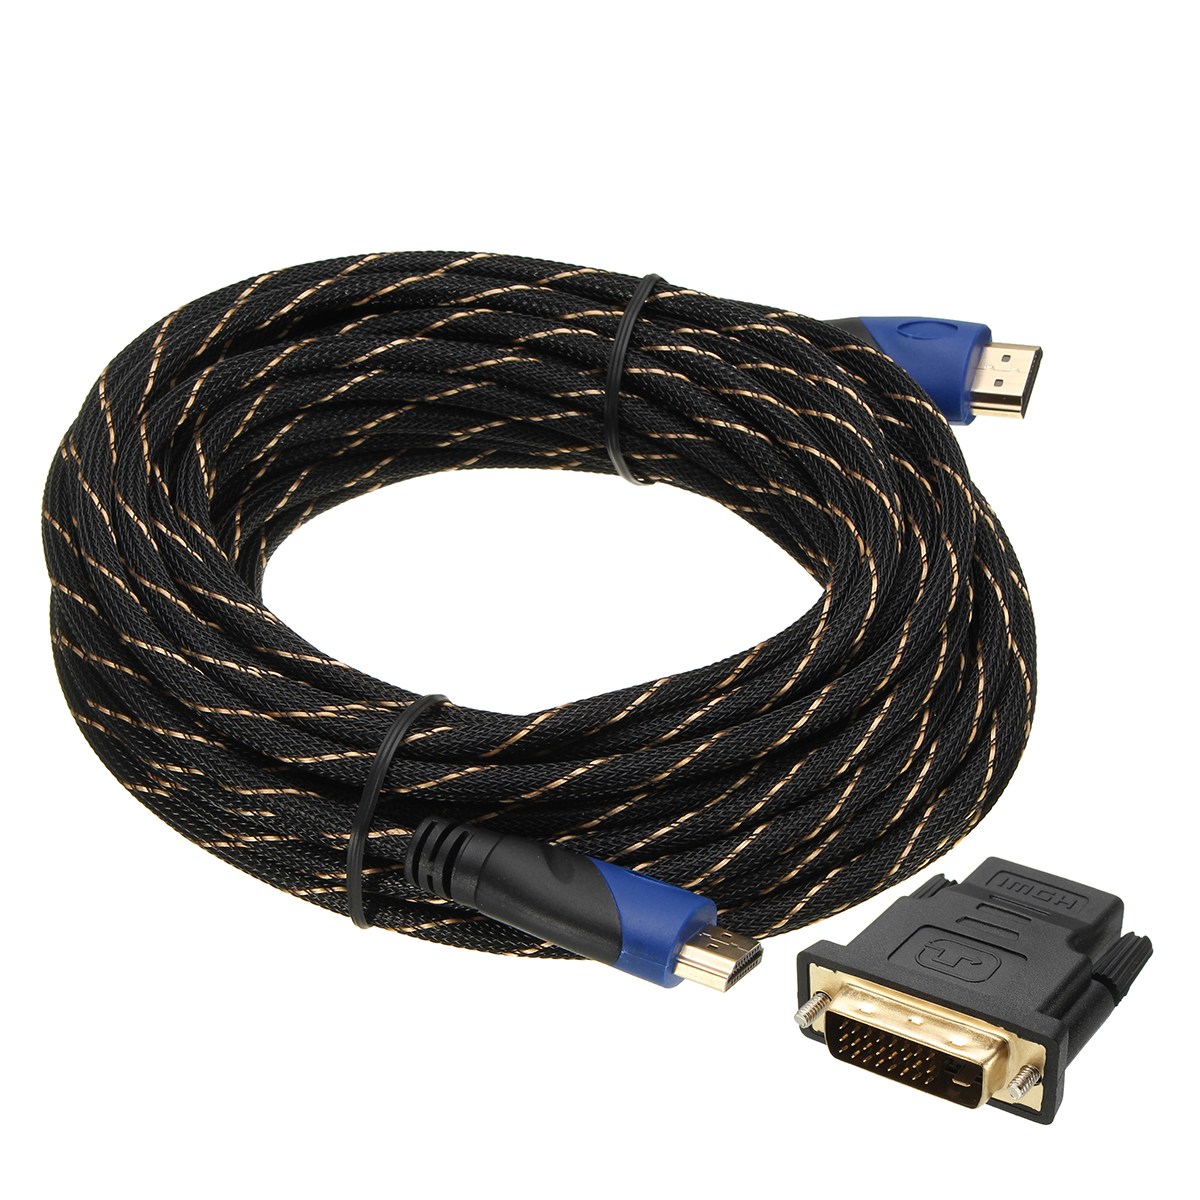 Braided HD Cable V1.4 1080P HD 3D for PS3 Xbox HDTV with DVI Connector 8